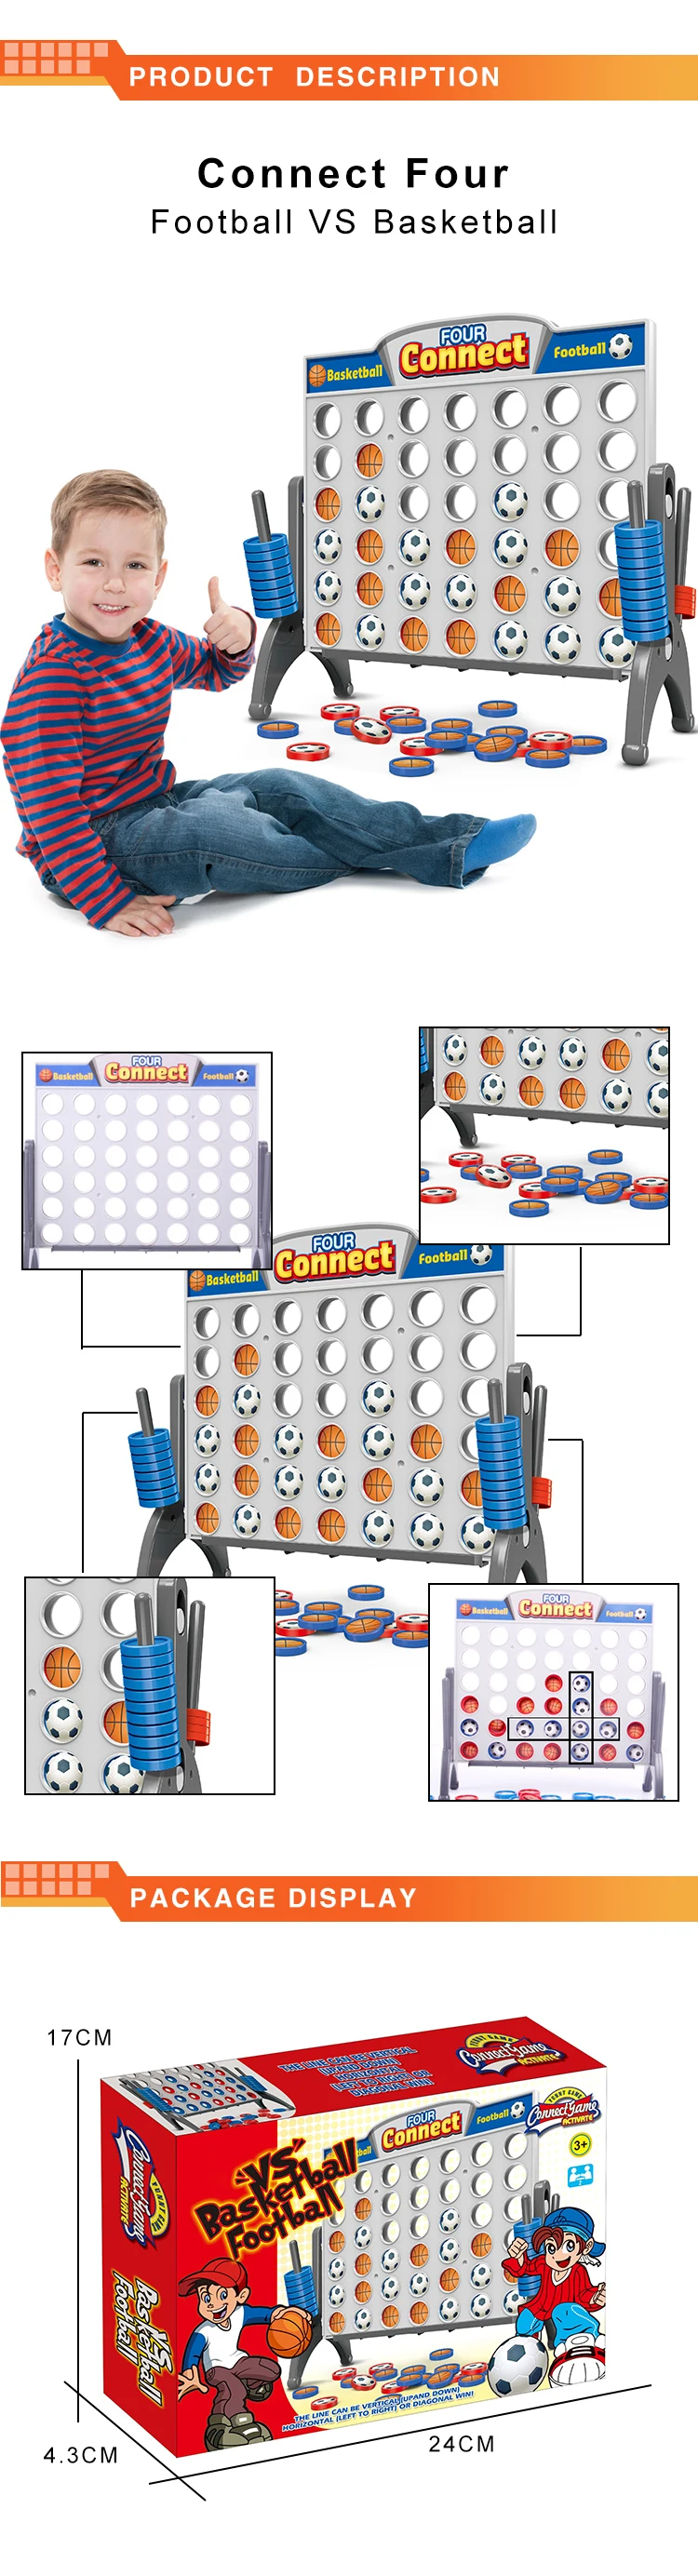 High quality Intelligence chess toy basketball and football connect four game